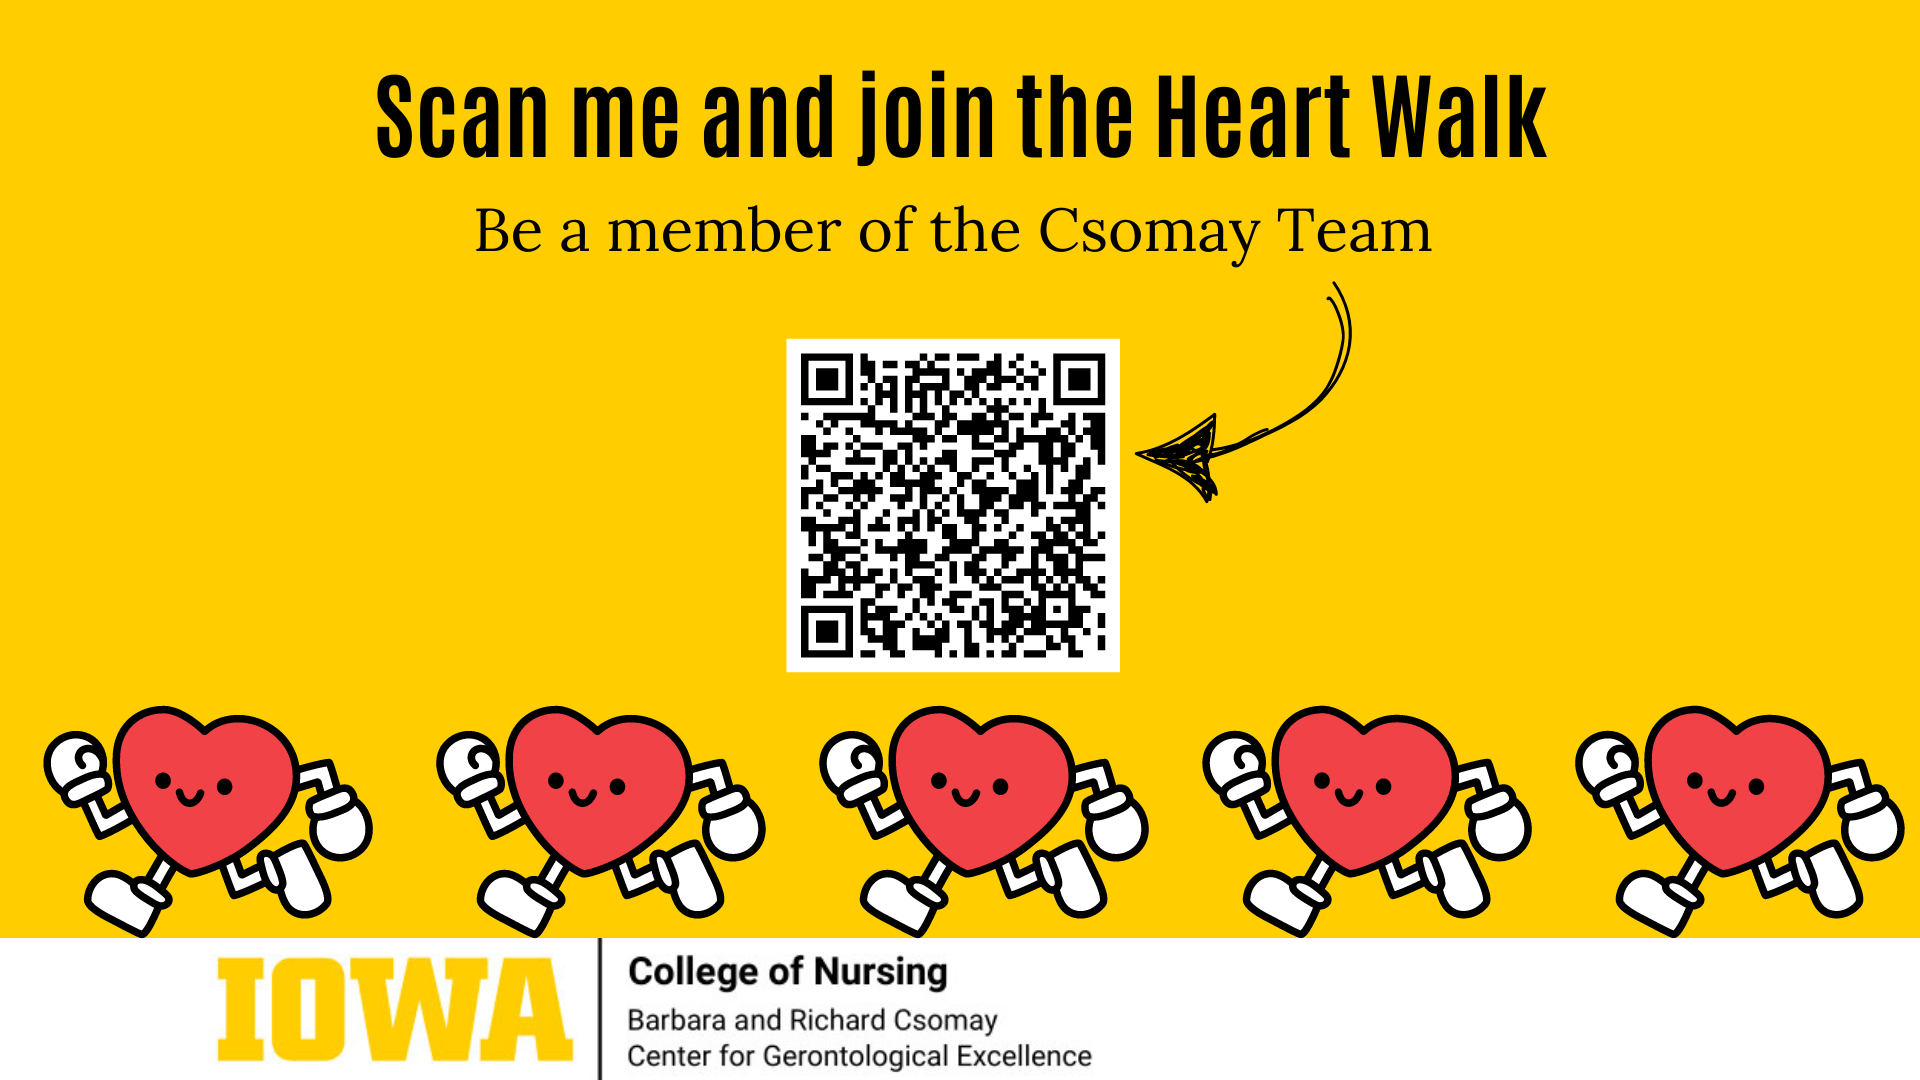 Join Csmoay Center team for Heart Walk May 4, scan qr code